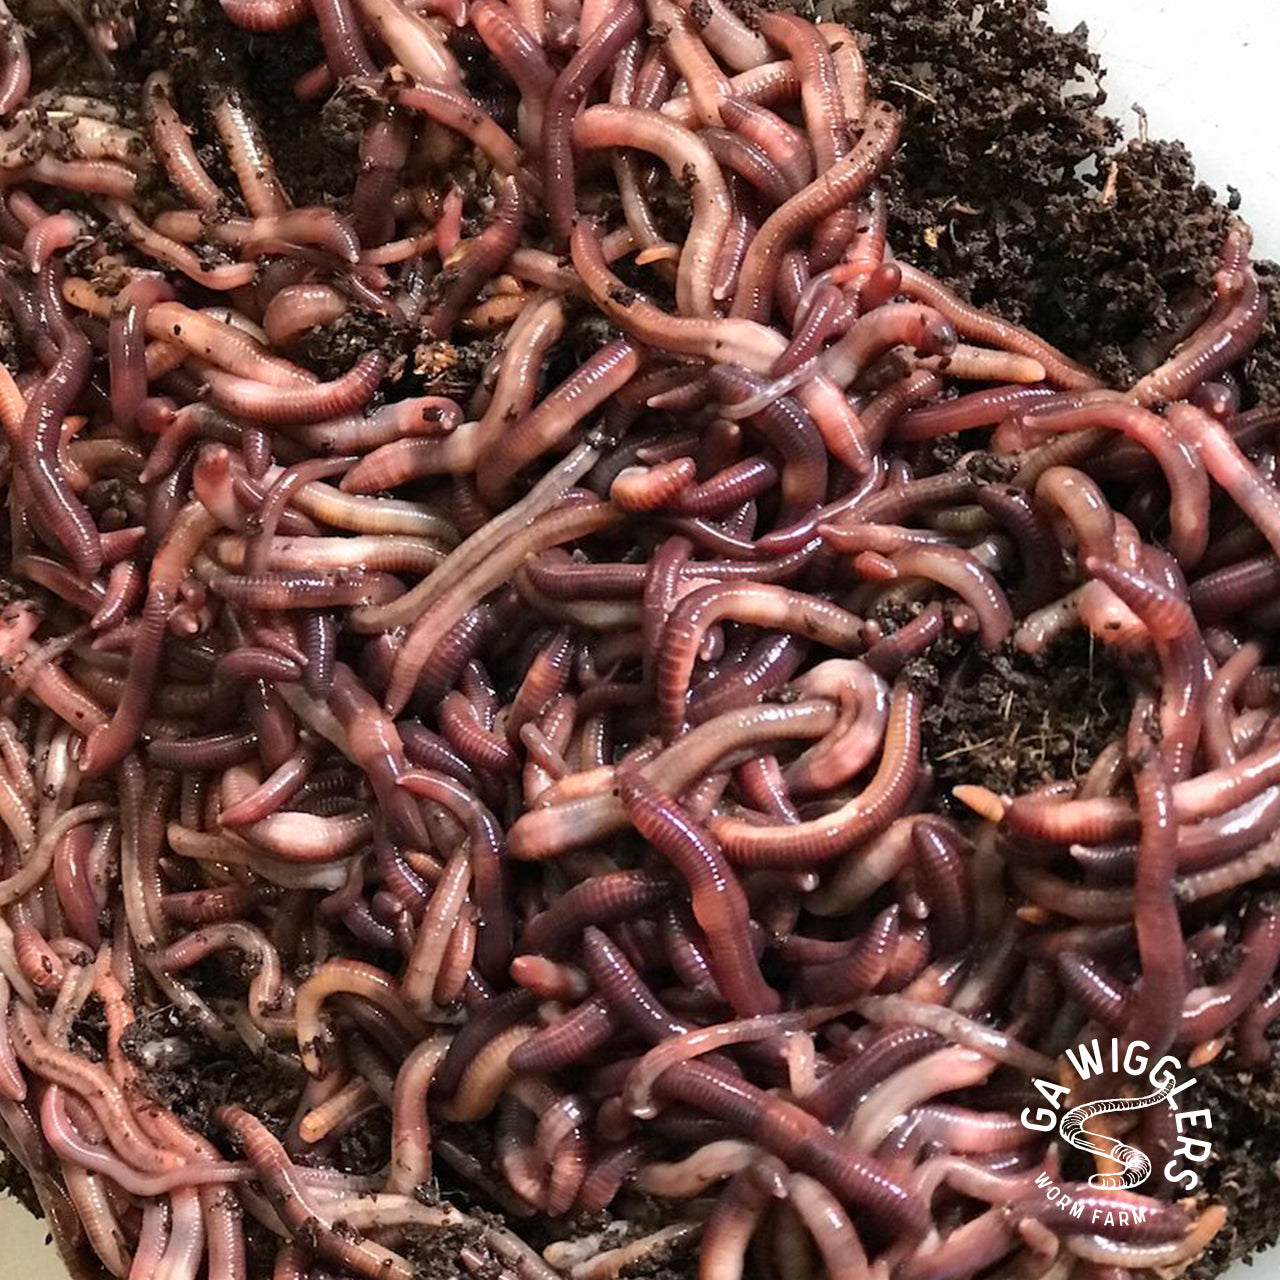 Red Wigglers Live Worms - FREE SHIPPING!